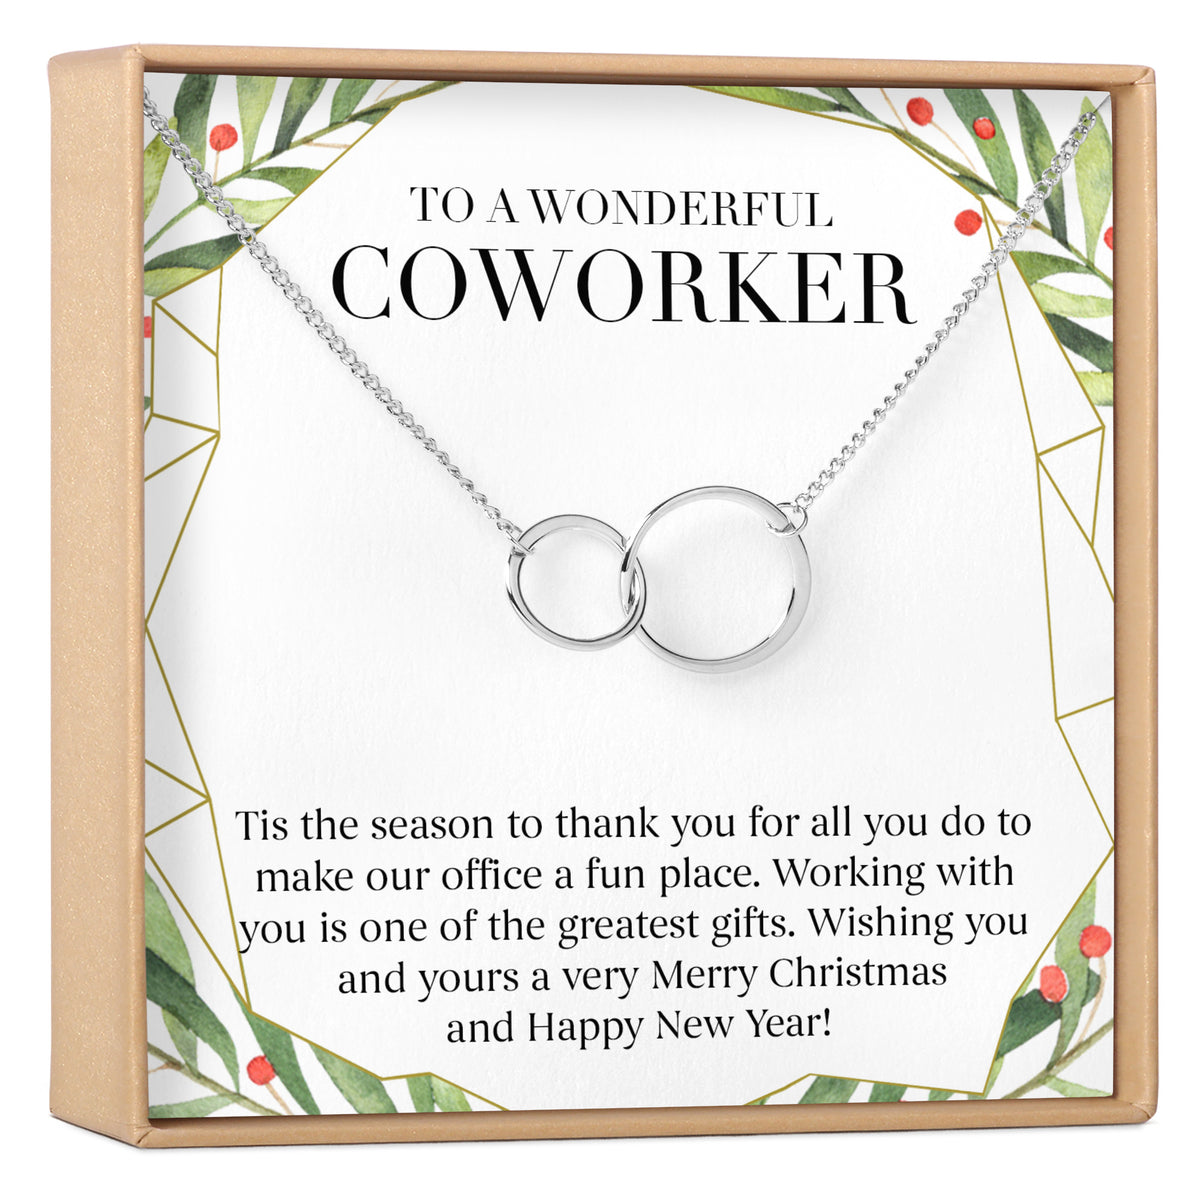 Thank You Gift for Women Inspirational Gifts Coworker Gifts Office Gift  clear | eBay